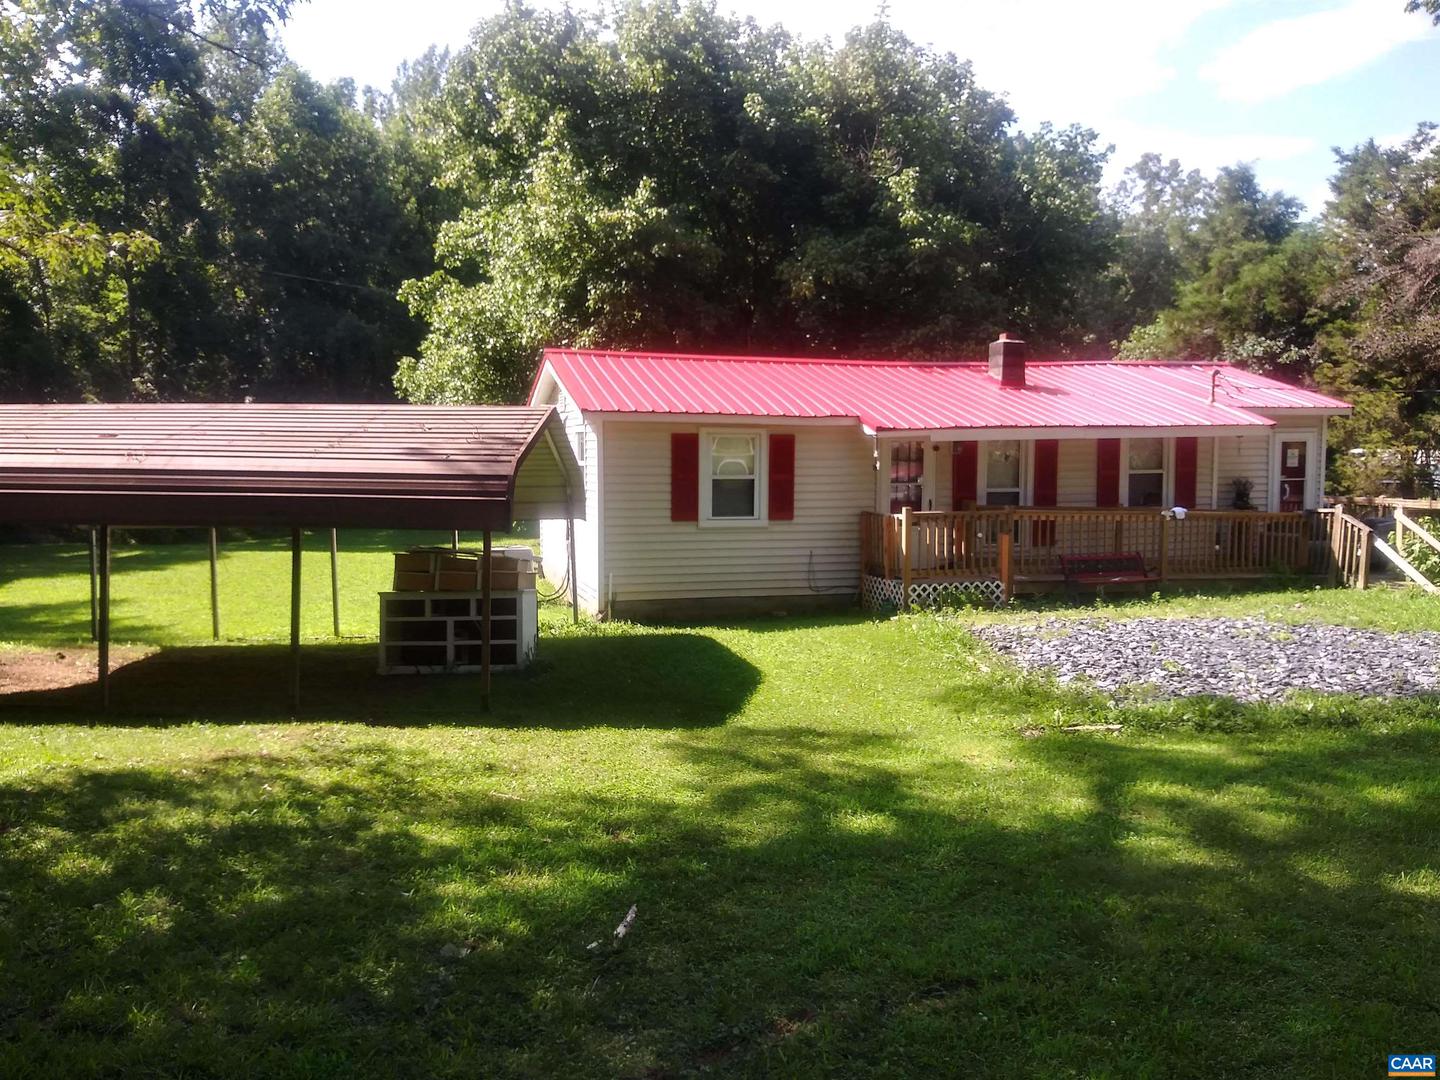 475 LIBERTY RD, NEW CANTON, Virginia 23123, 3 Bedrooms Bedrooms, ,1 BathroomBathrooms,Residential,For sale,475 LIBERTY RD,645273 MLS # 645273